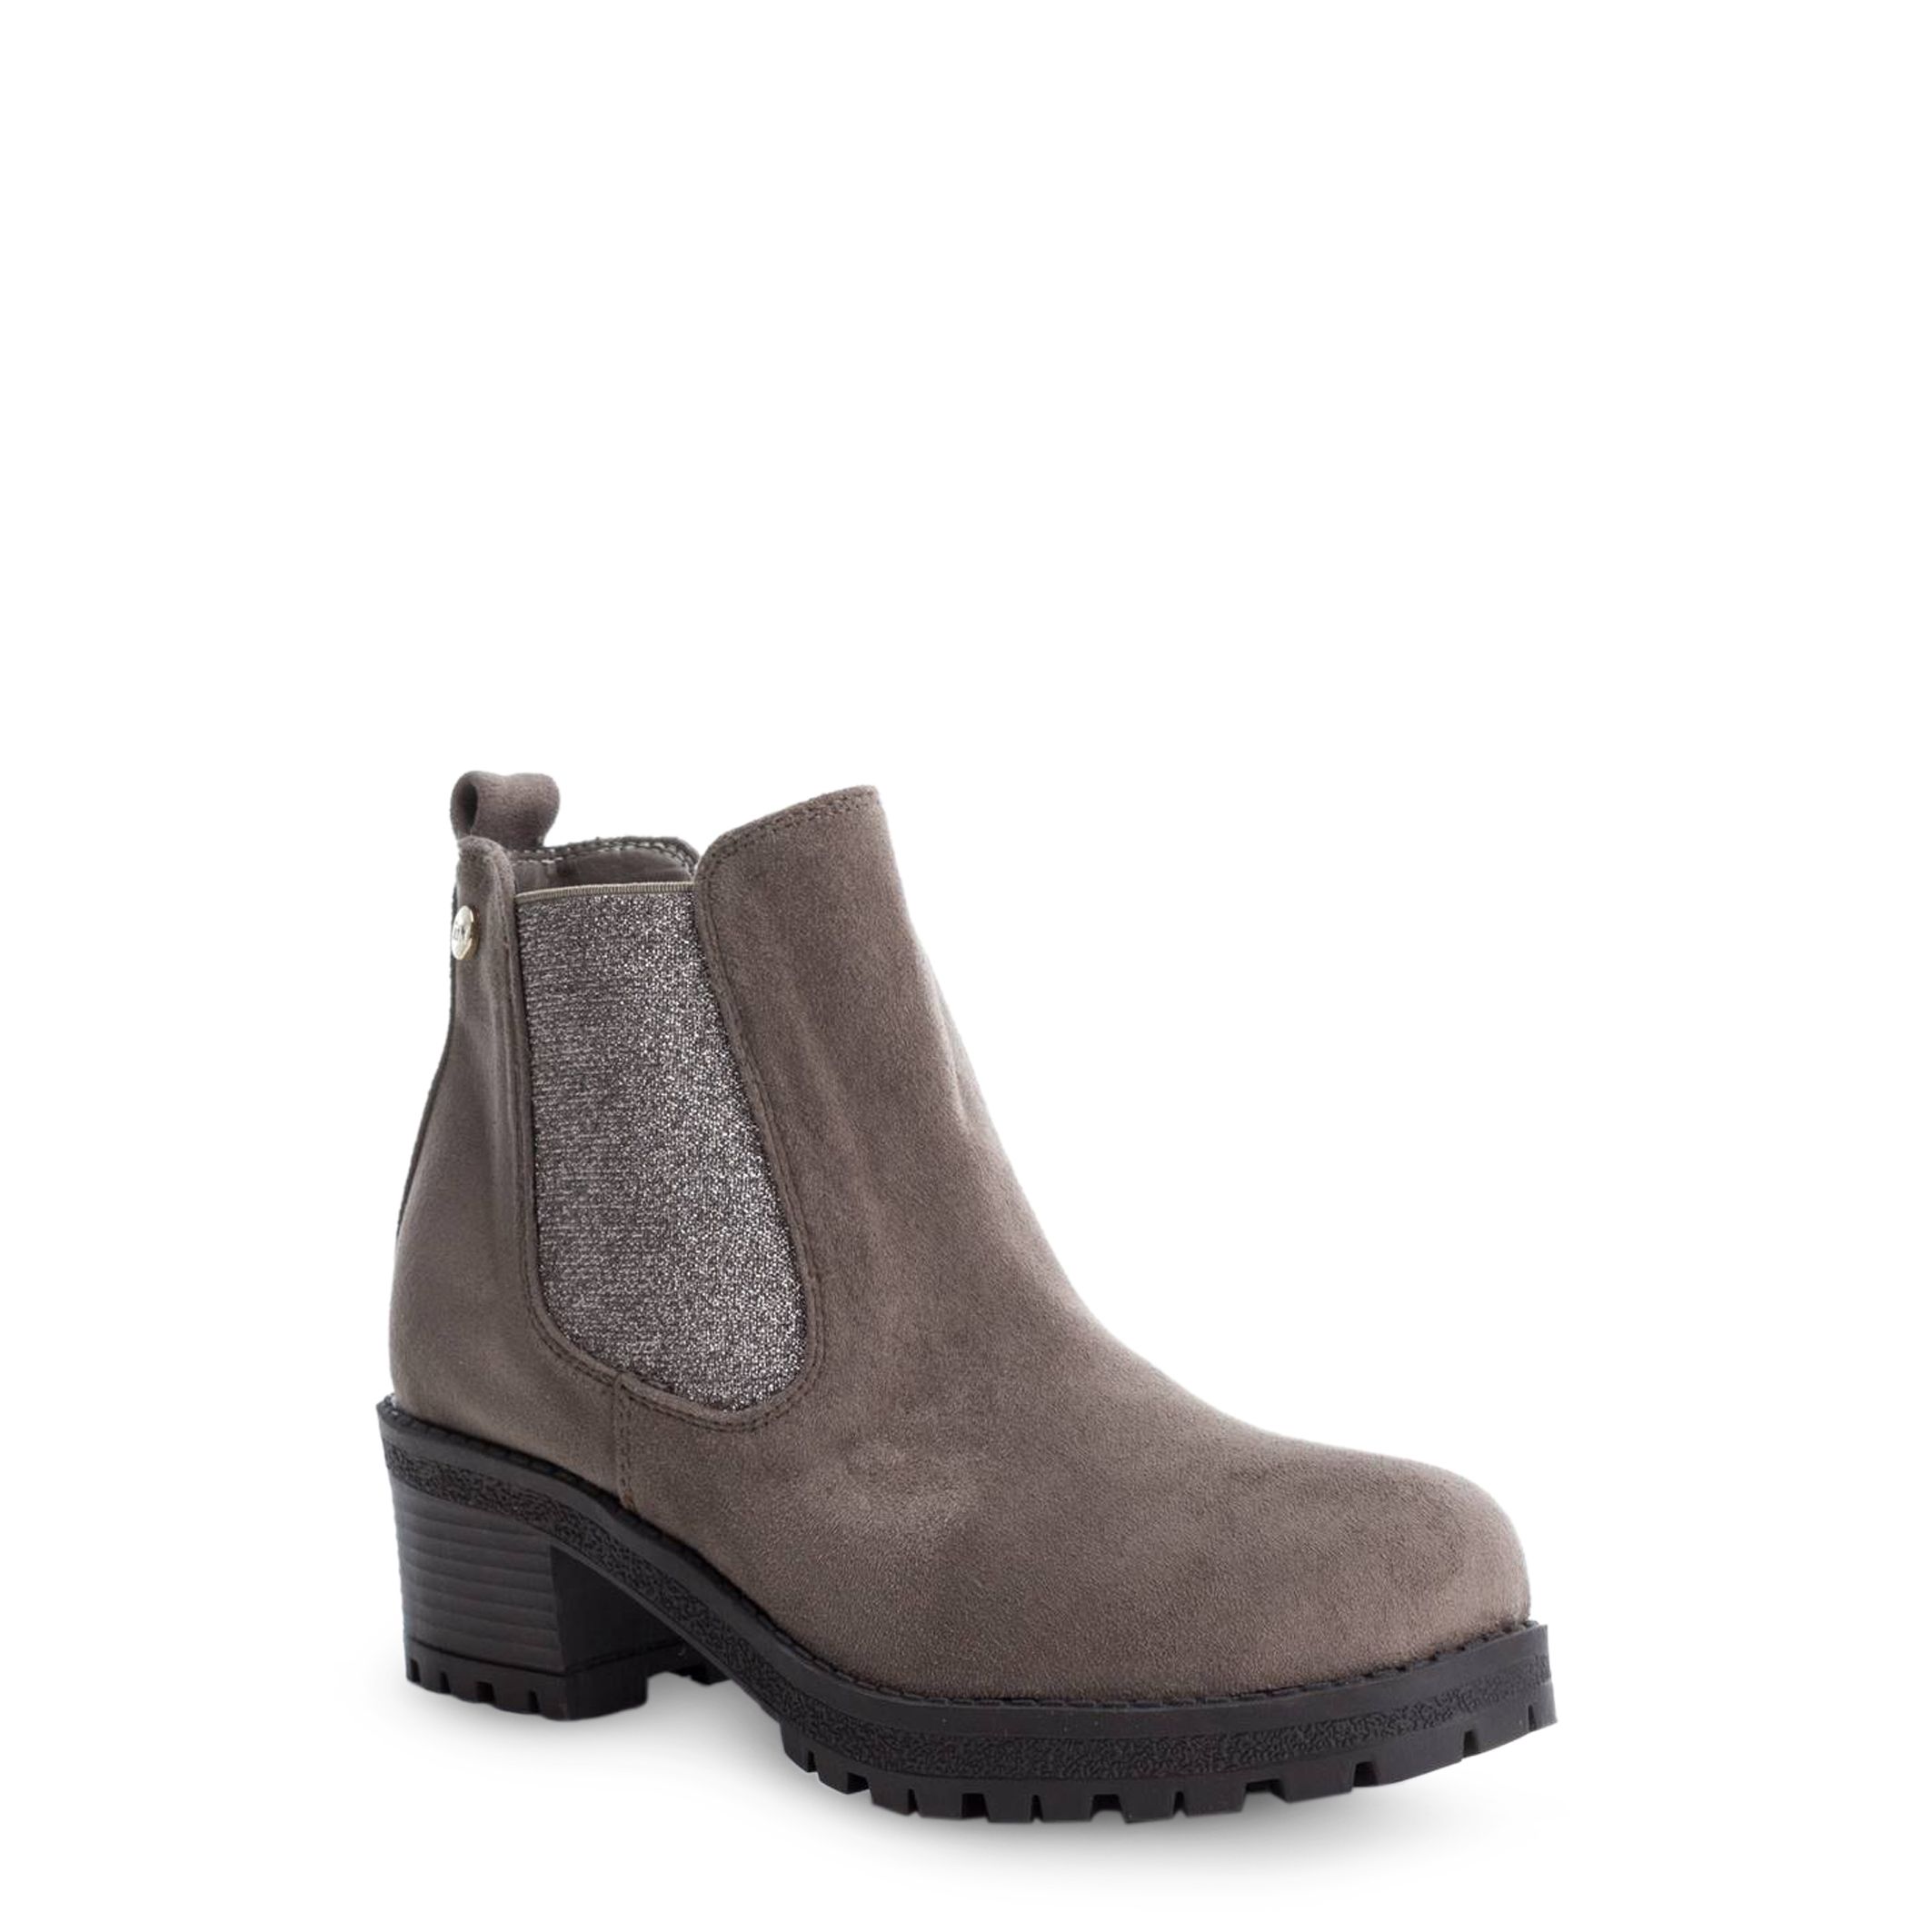 Collection: Fall/Winter <br> Gender: Woman <br> Type: Ankle boots <br> Upper: synthetic material <br> Internal lining: synthetic material, fabric <br> Sole: rubber <br> Heel height cm: 5 <br> Platform height cm: 2\ <br> Details: elastic gores, round toe